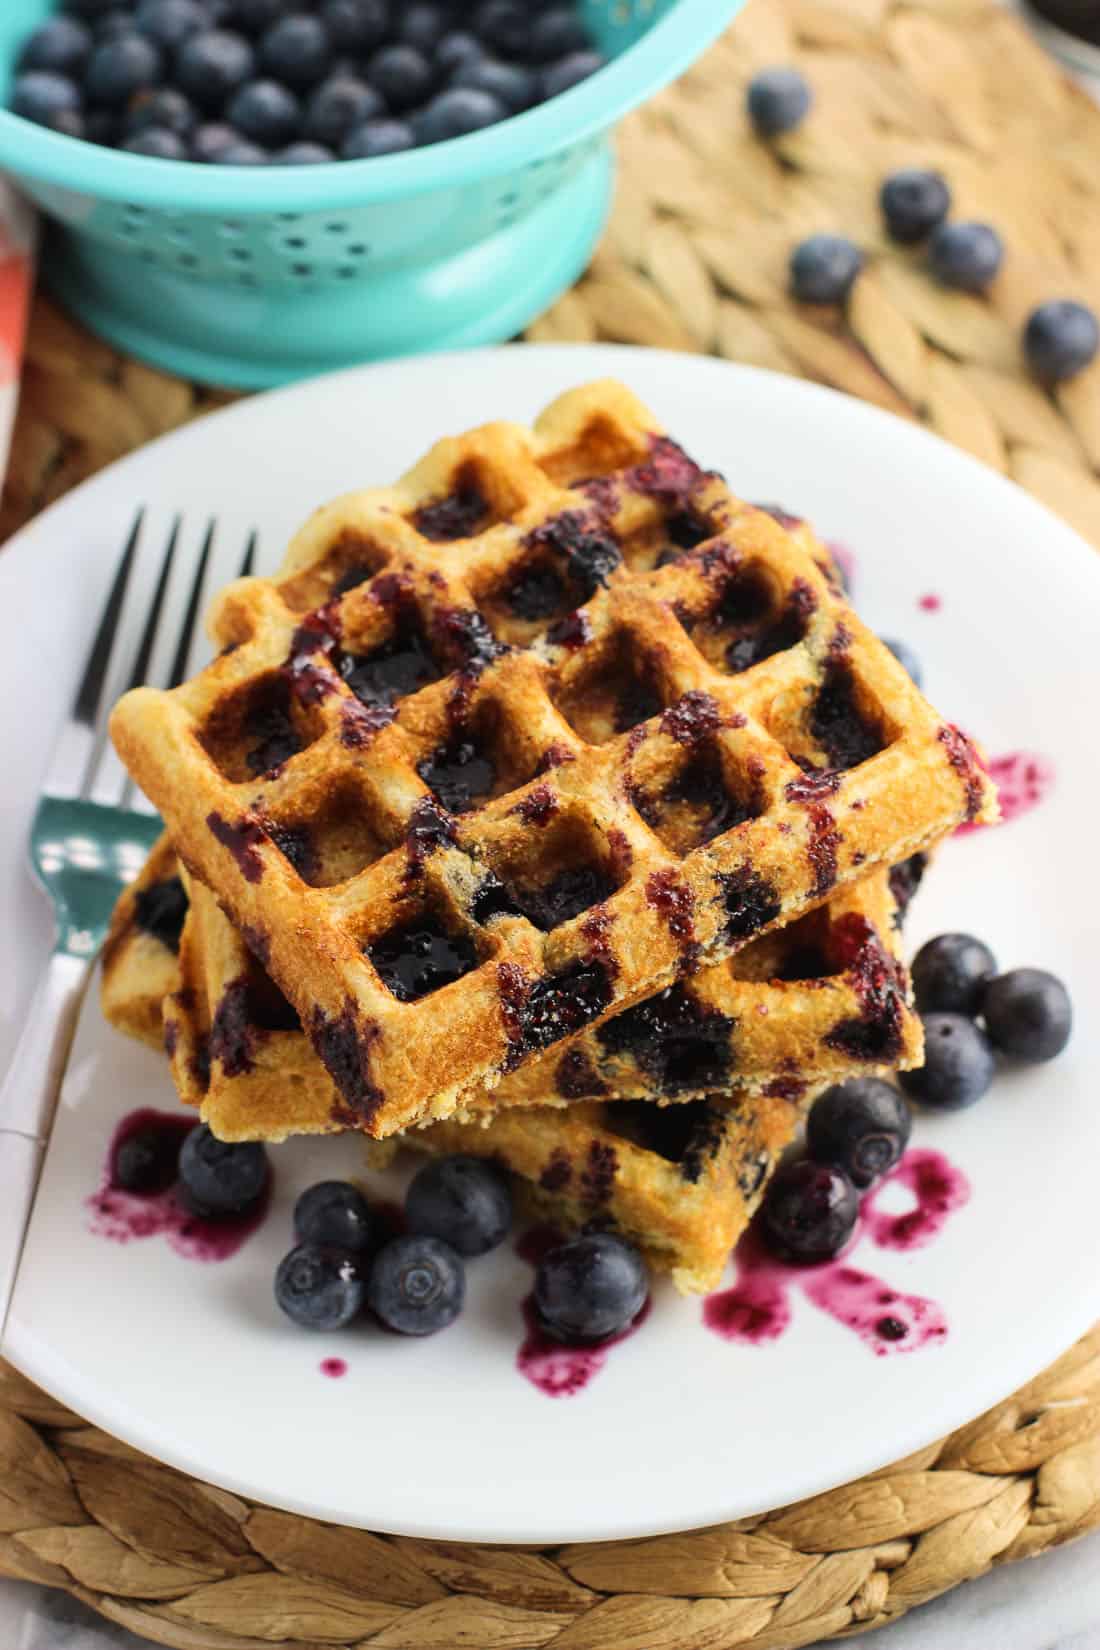 Three waffles on a plate drizzled with syrup and served with plenty of fresh berries.